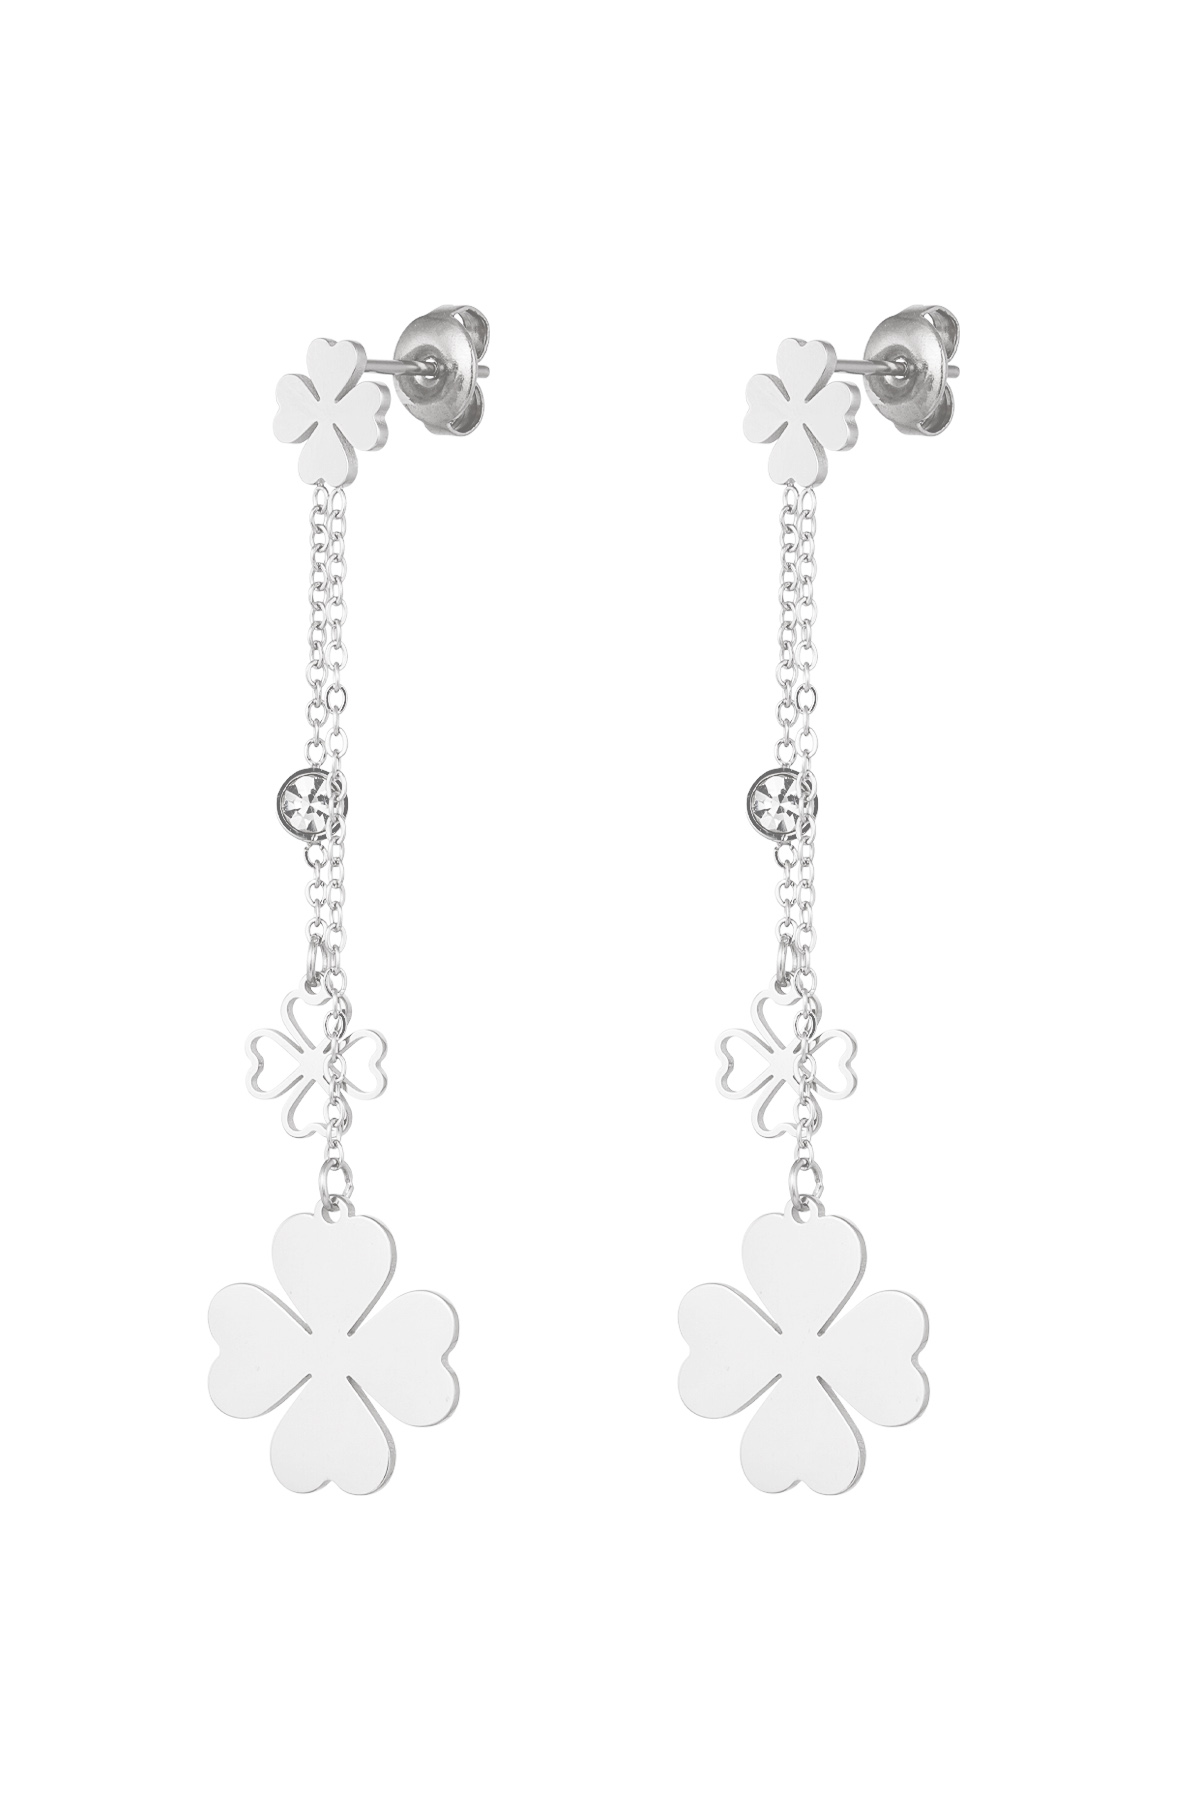 Hanging clover earrings - silver h5 